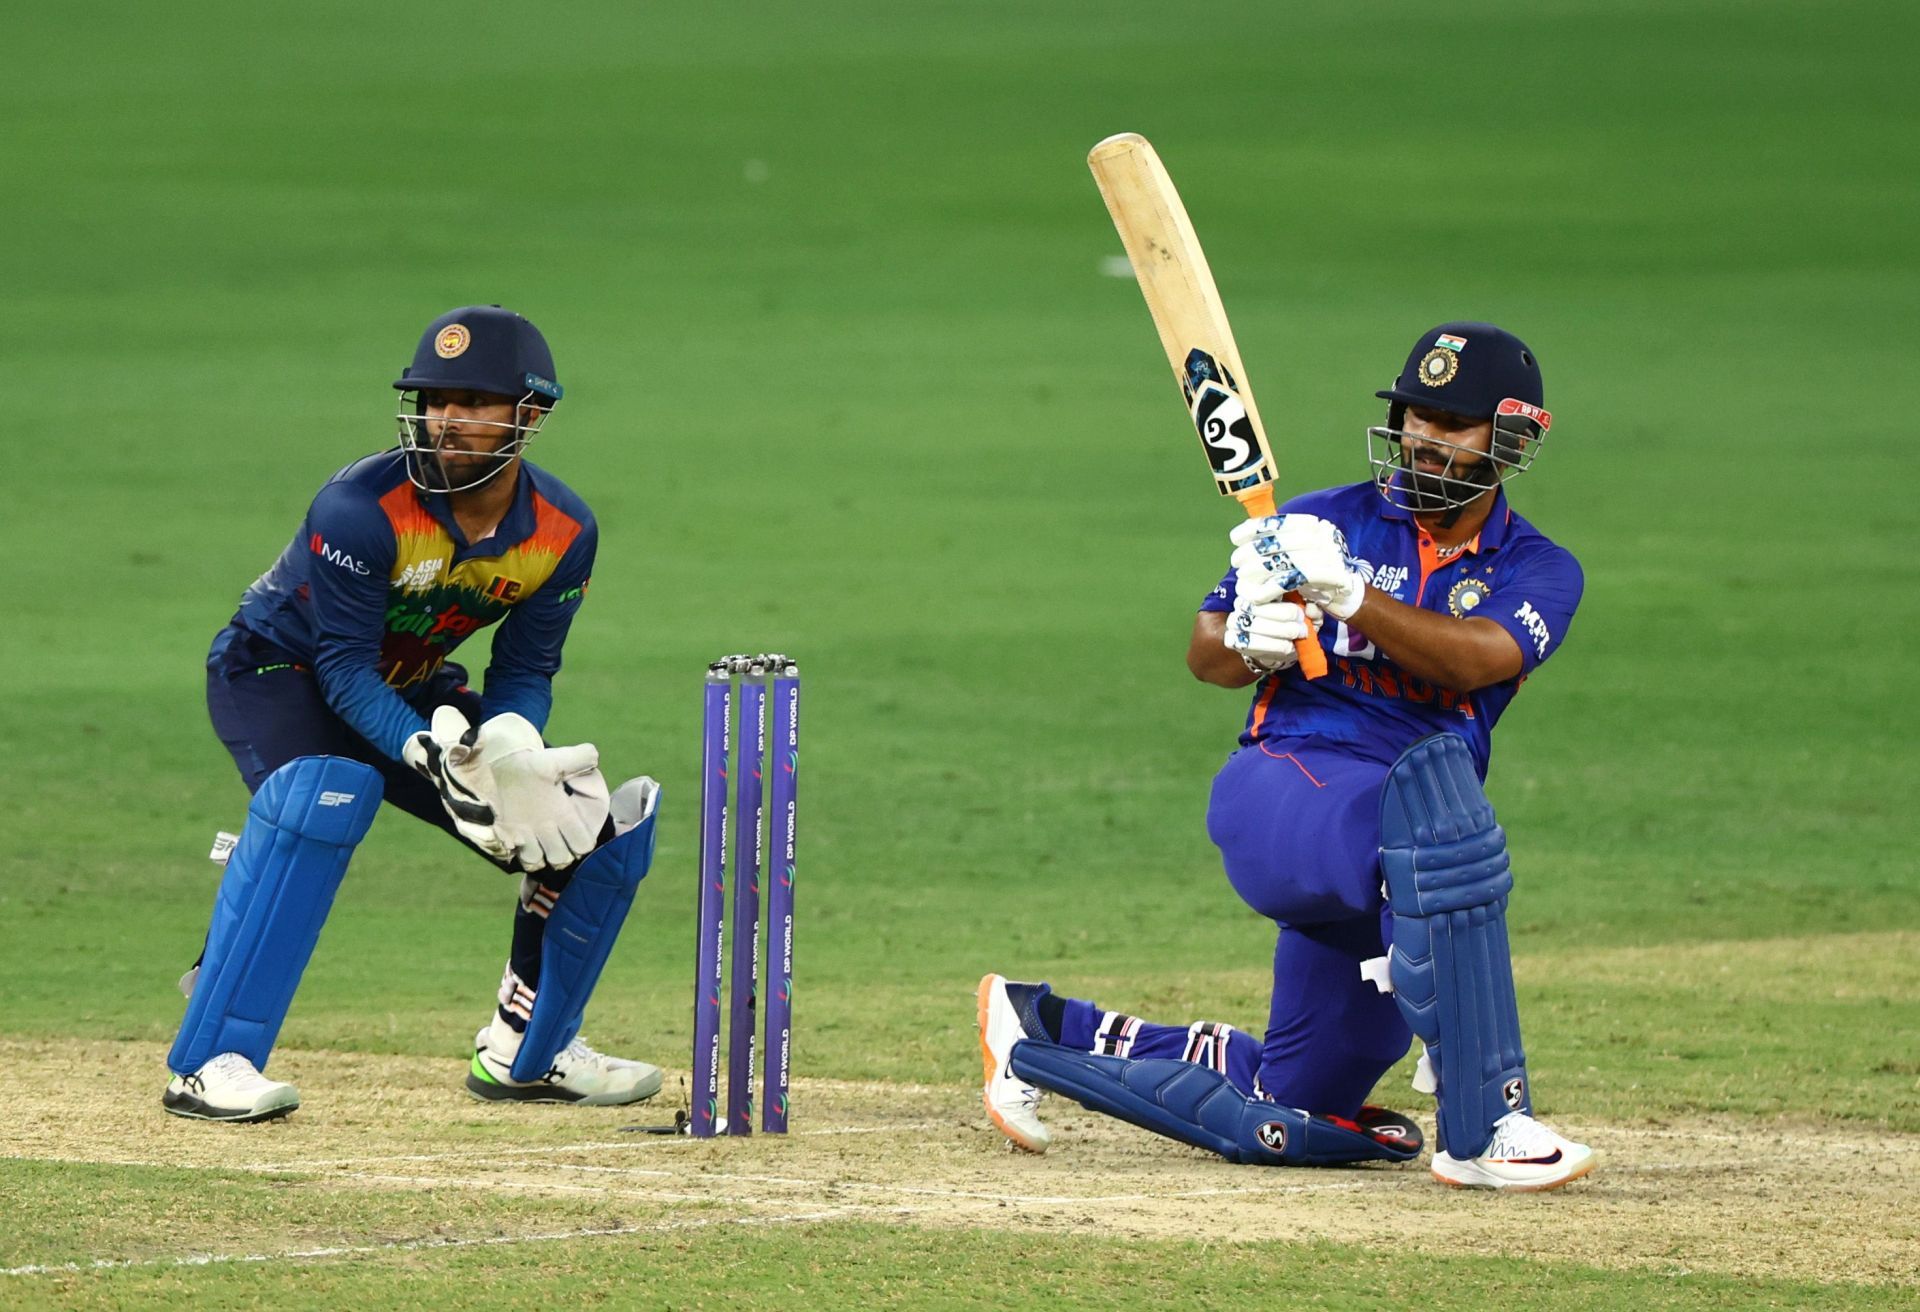 Rishabh Pant did not play a substantial knock in the Asia Cup 2022.